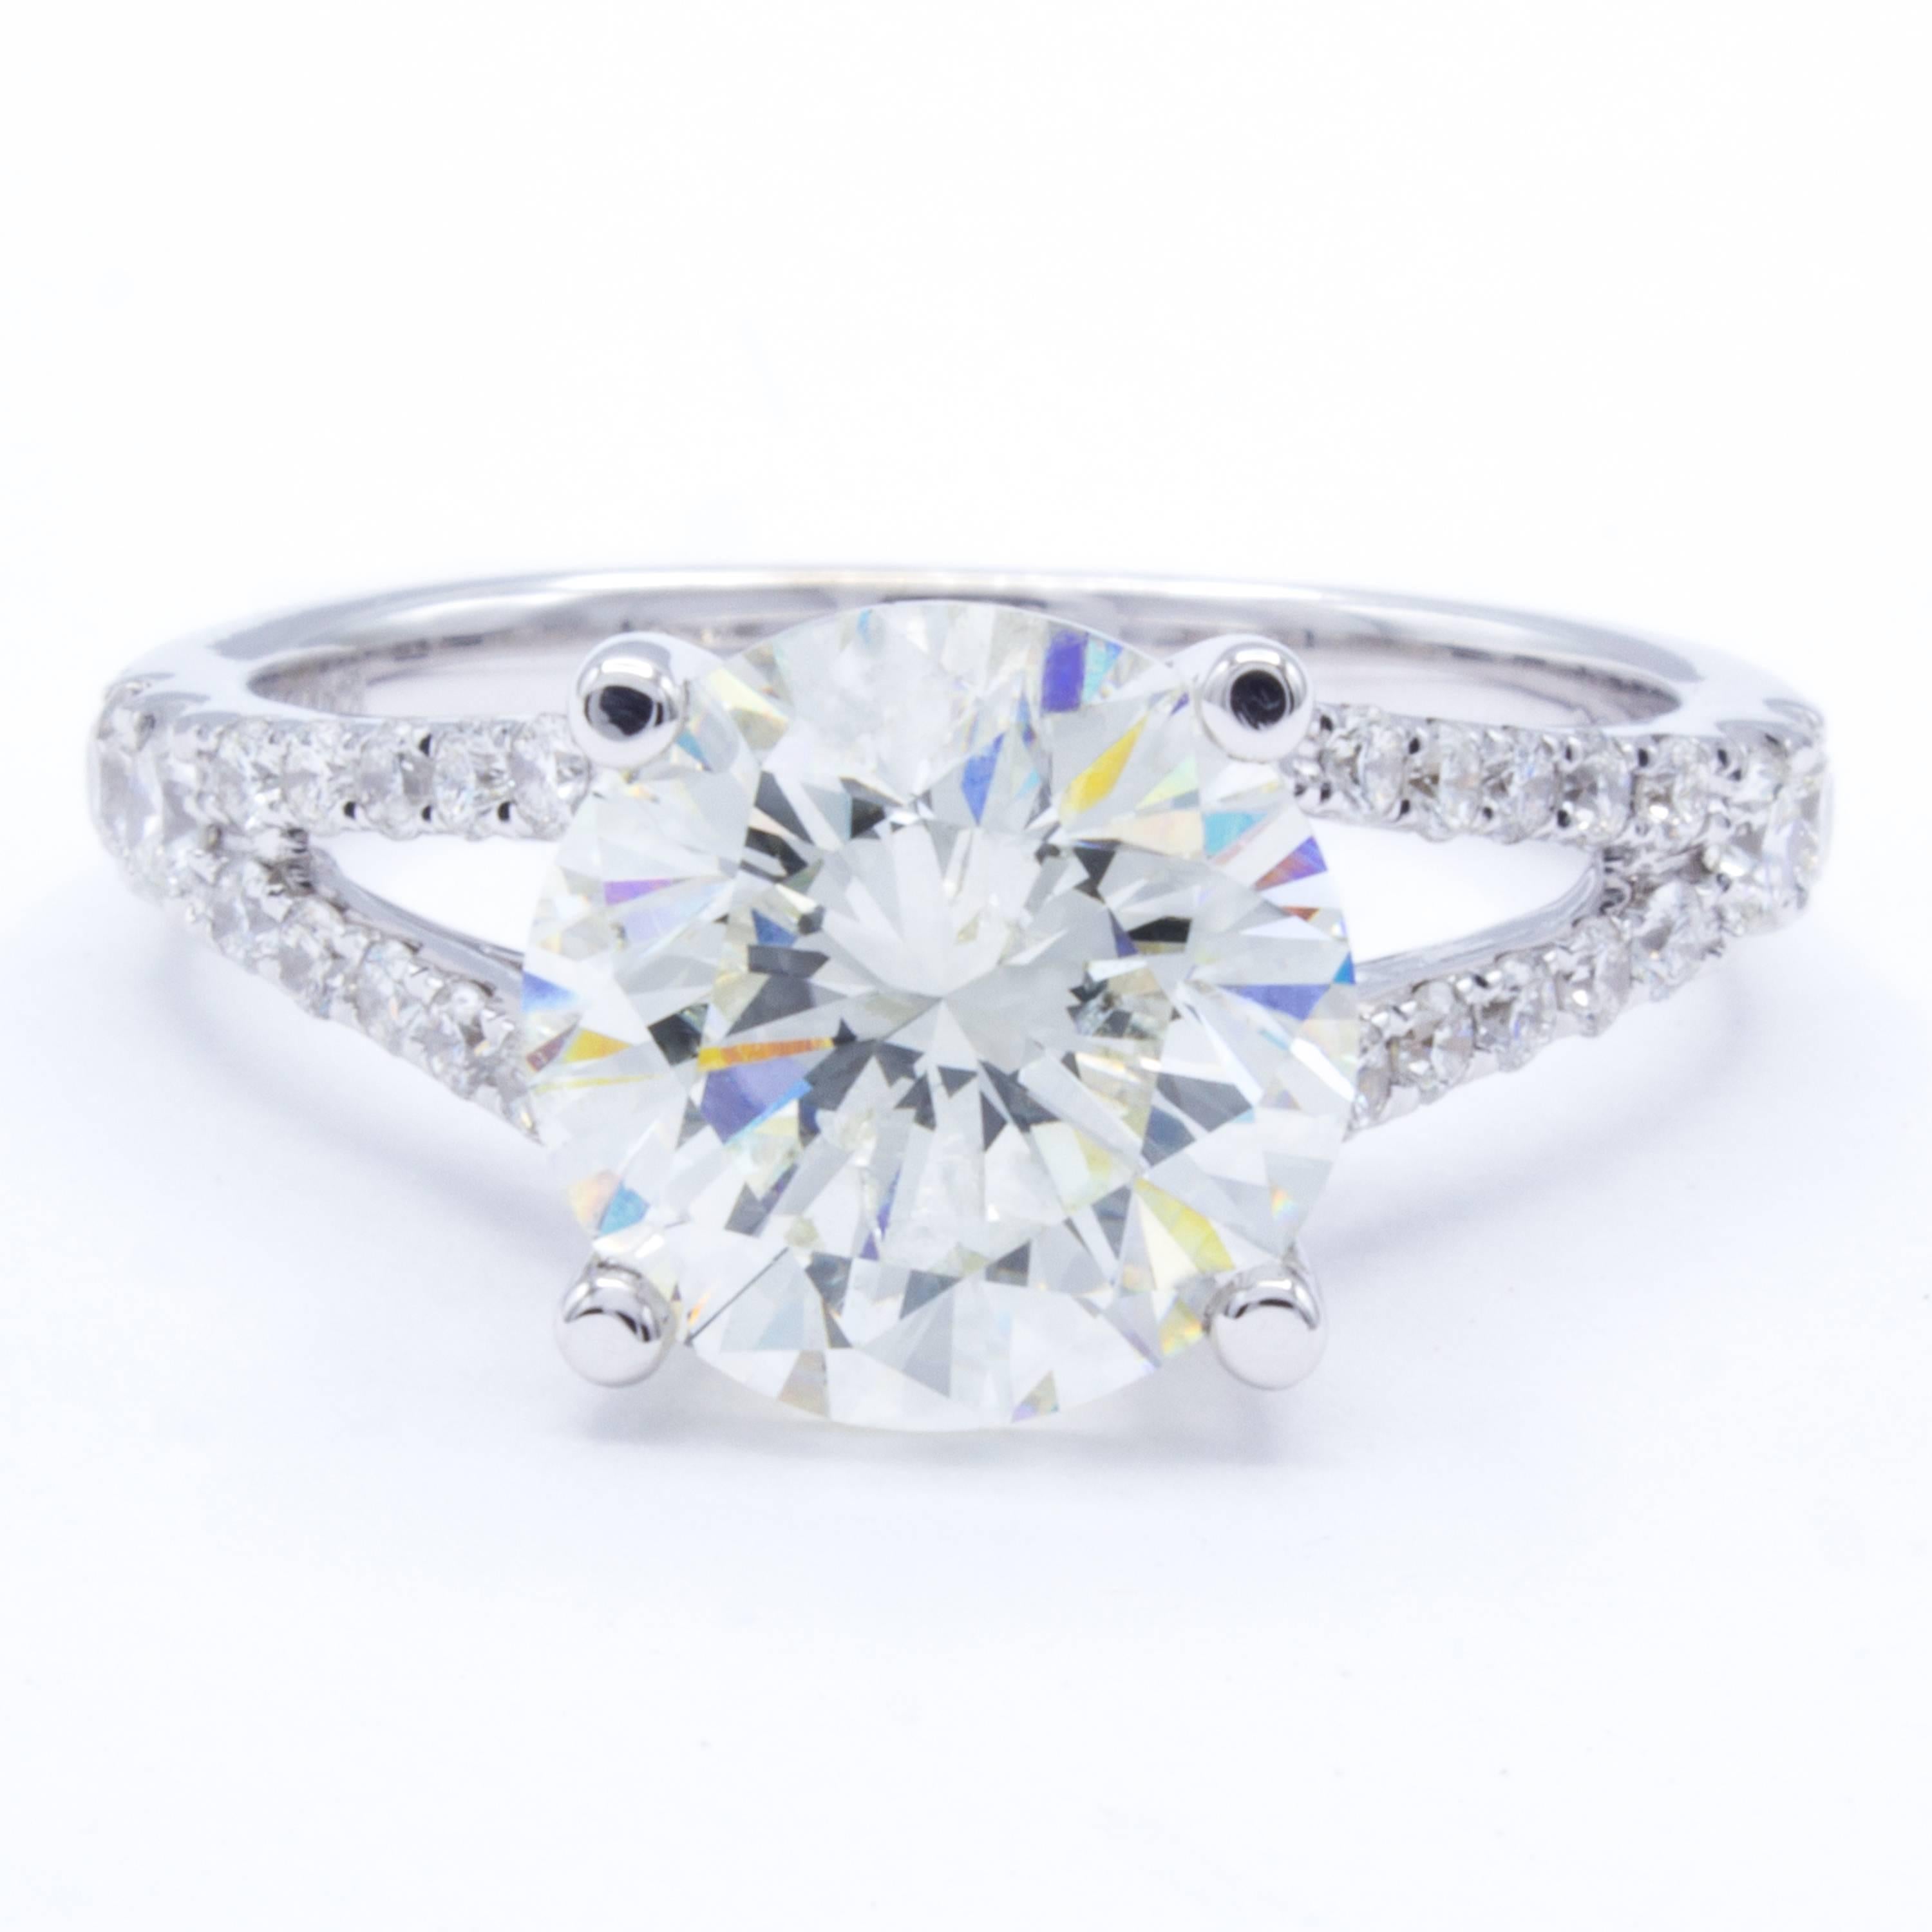 An exceptional diamond engagement ring shows a split shank band of 18kt white gold. All across the band shine round brilliant pave set diamond accents. At the center, a scintillating 2.87 carat round brilliant diamond sends fiery motes in every